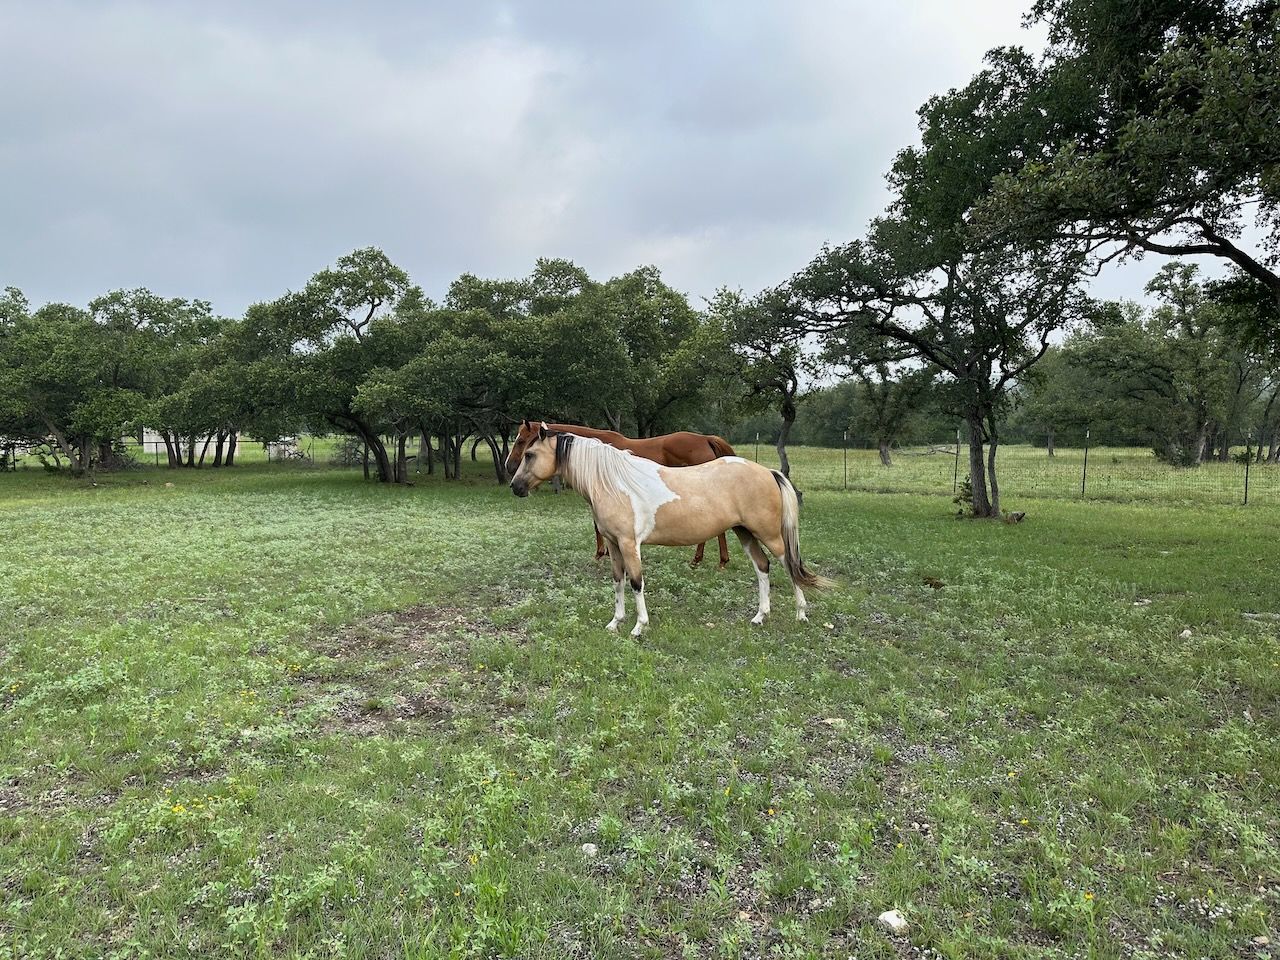 Two horses standing in a field, small trees in the background. The horse in front is shorter, a buckskin tobiano, a type of pinto. The horse in the background is taller, sorrel or red.